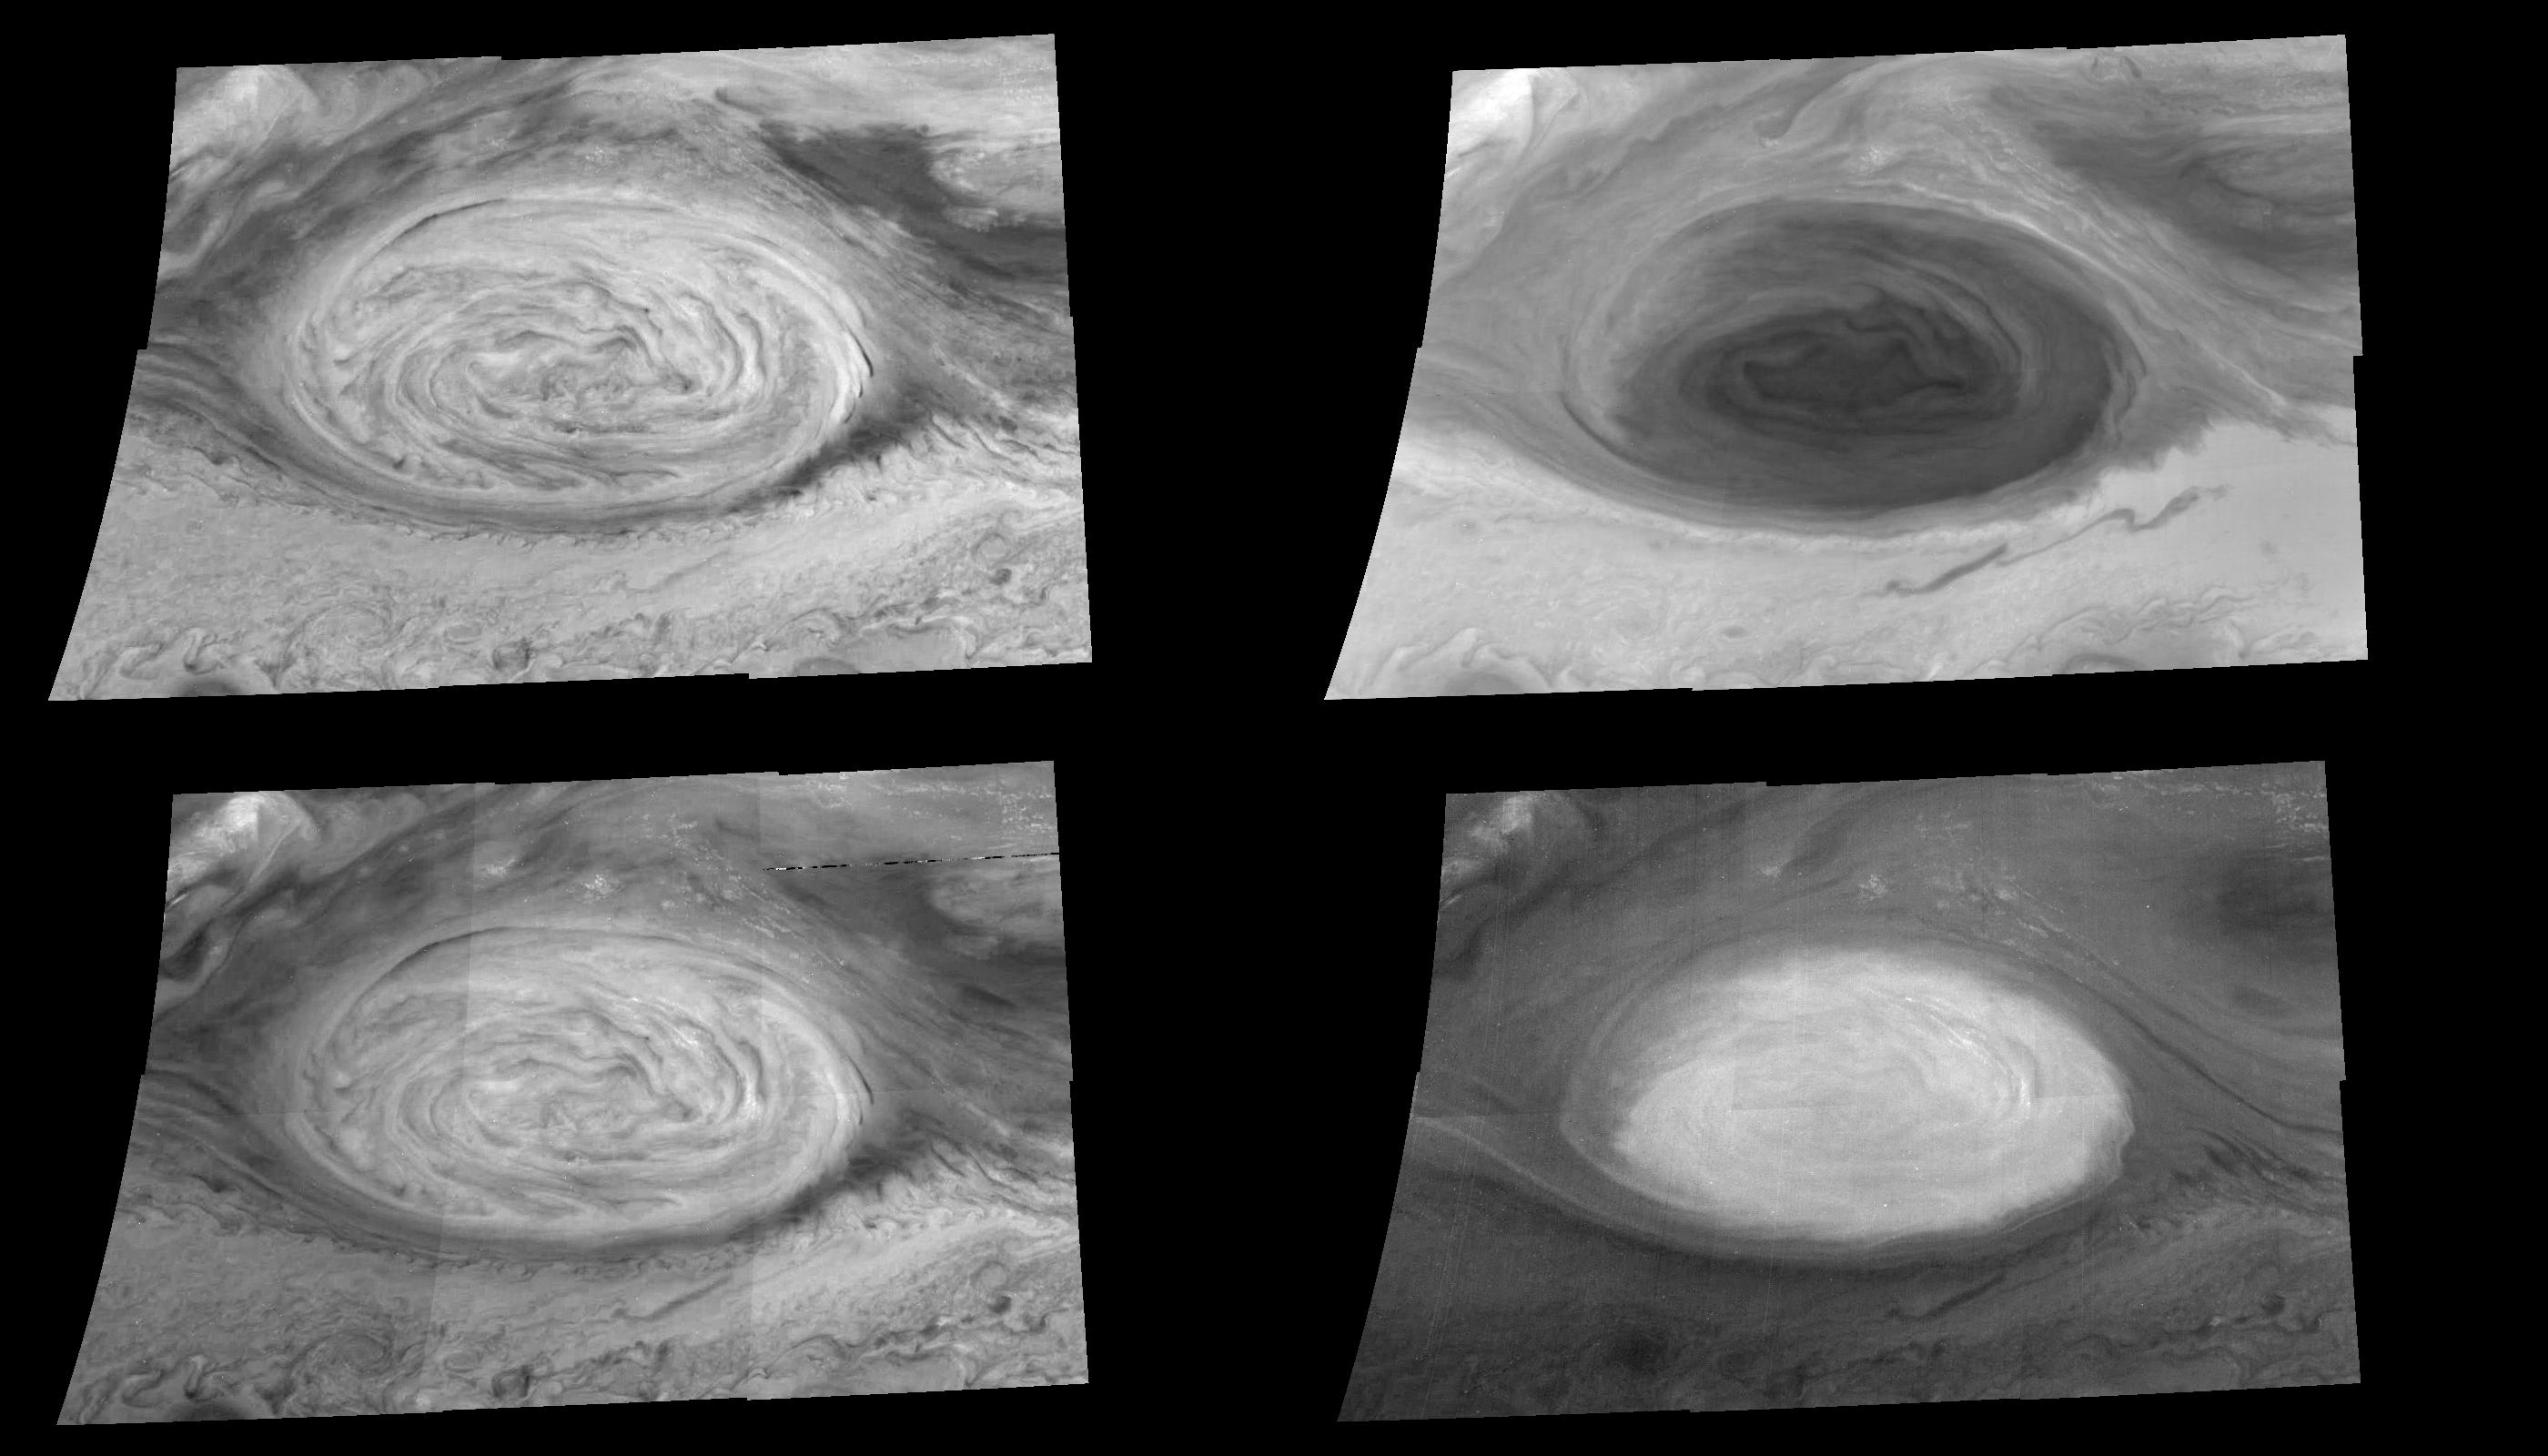 These mosaics (6 frames each) show the appearance of the Great Red Spot in infrared light (757 nanometers at upper left), violet light (415 nanometers at upper right), and infrared light within both a weak (732 nanometers at lower left) and a strong (886 nanometers at lower right) methane absorption band. 